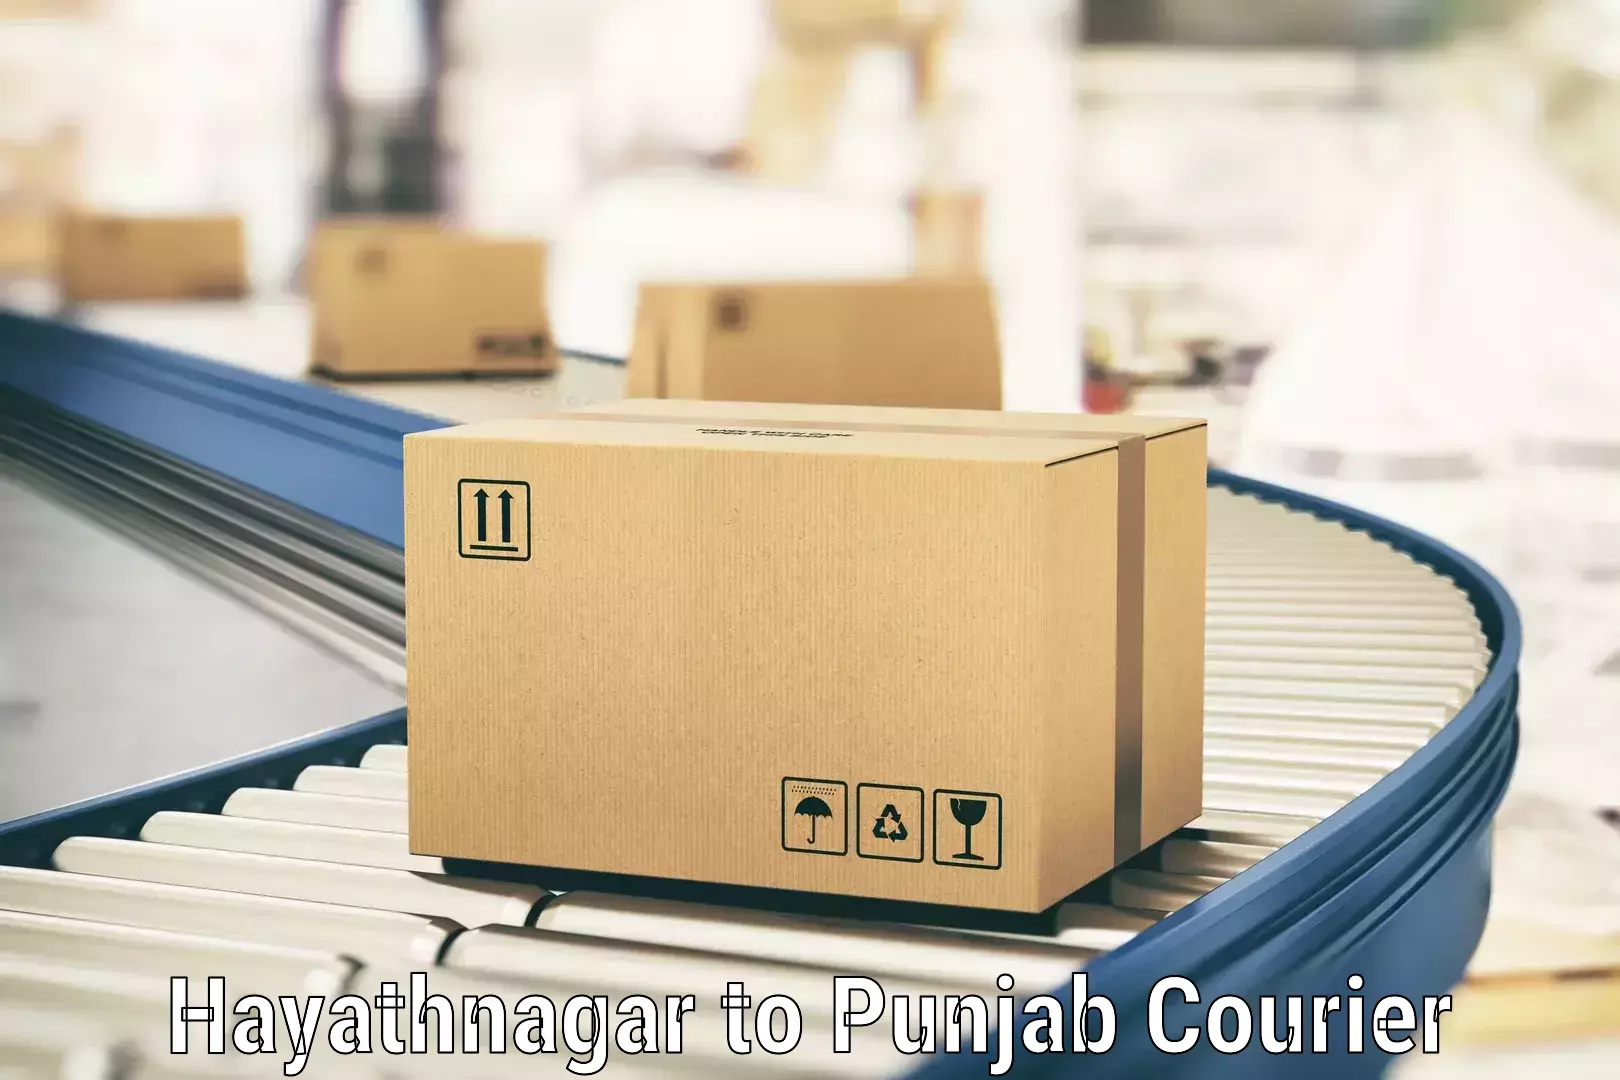 Optimized delivery routes Hayathnagar to Ropar